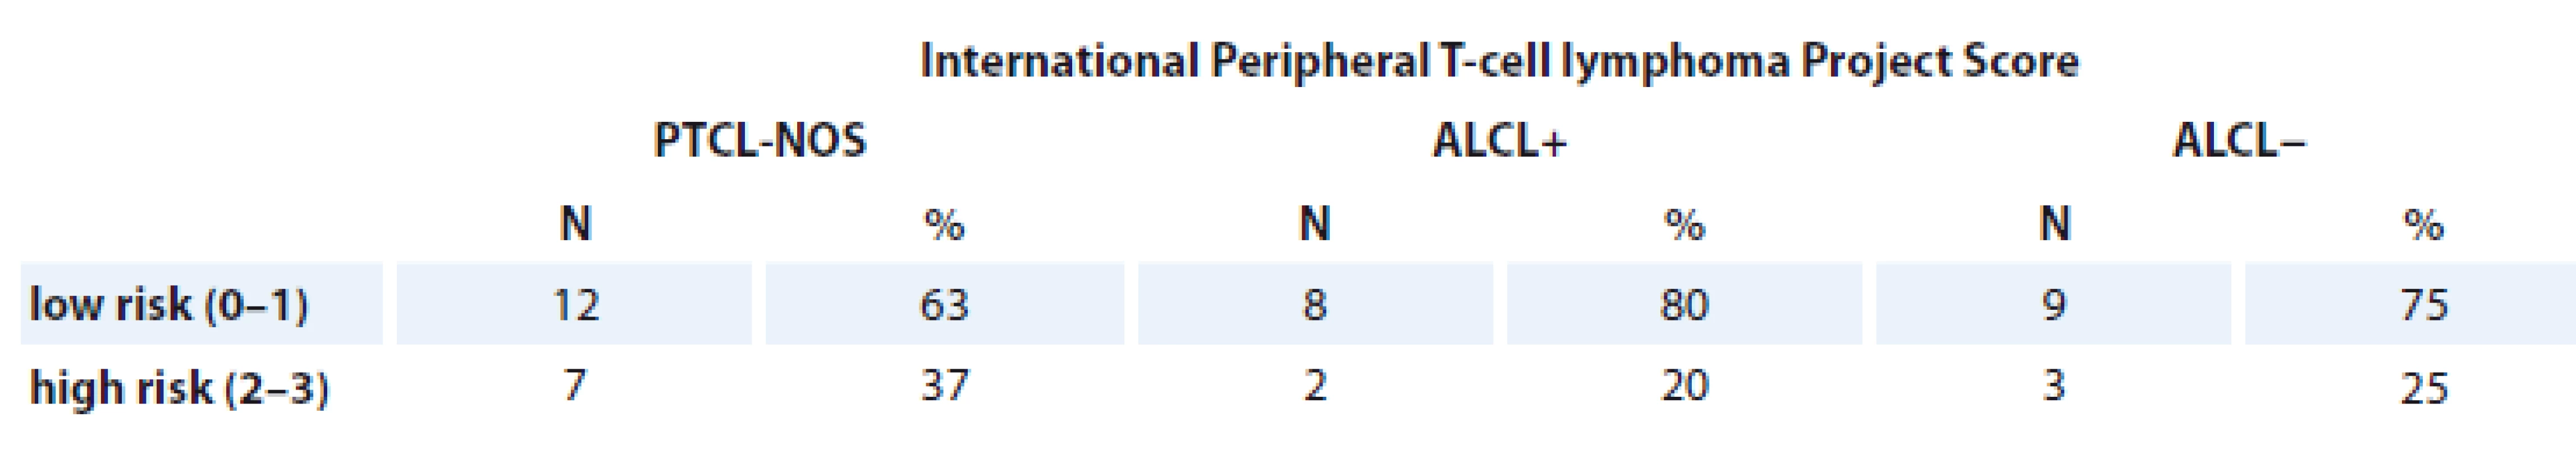 Patients assessed with International Peripheral T-cell lymphoma Project Score.